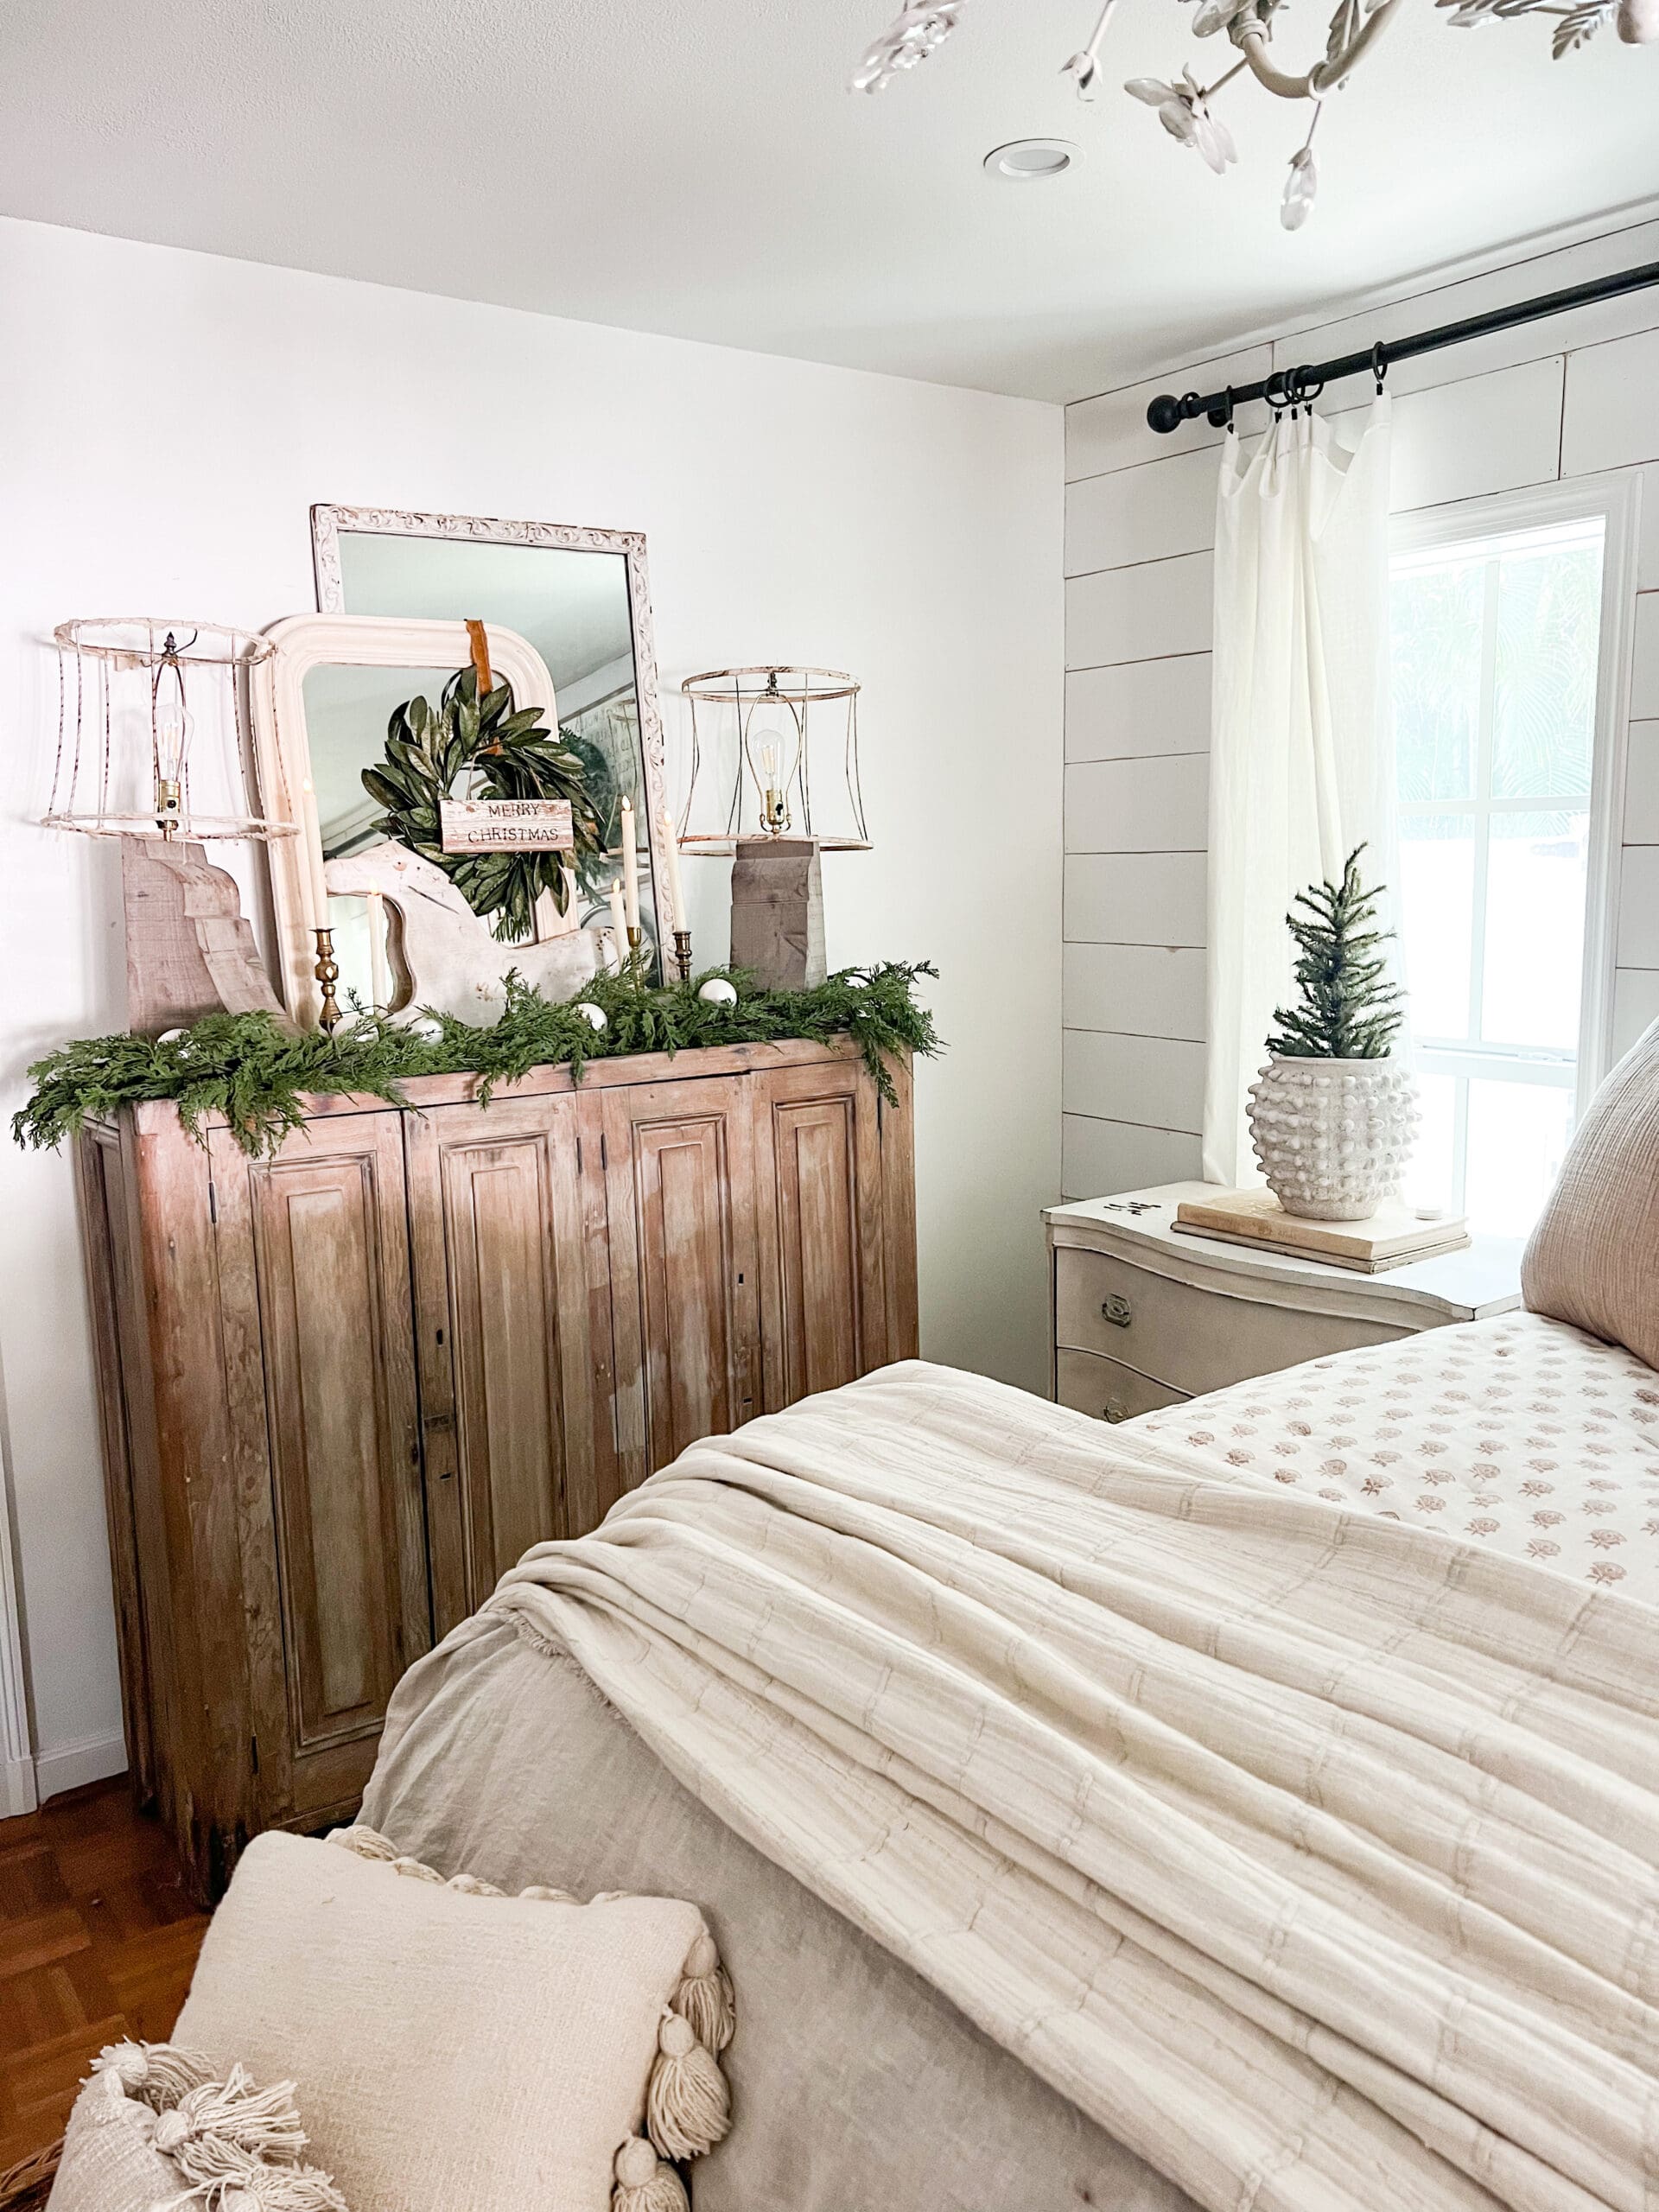 wooden nightstand styled for Christmas with holiday greenery and a small tree